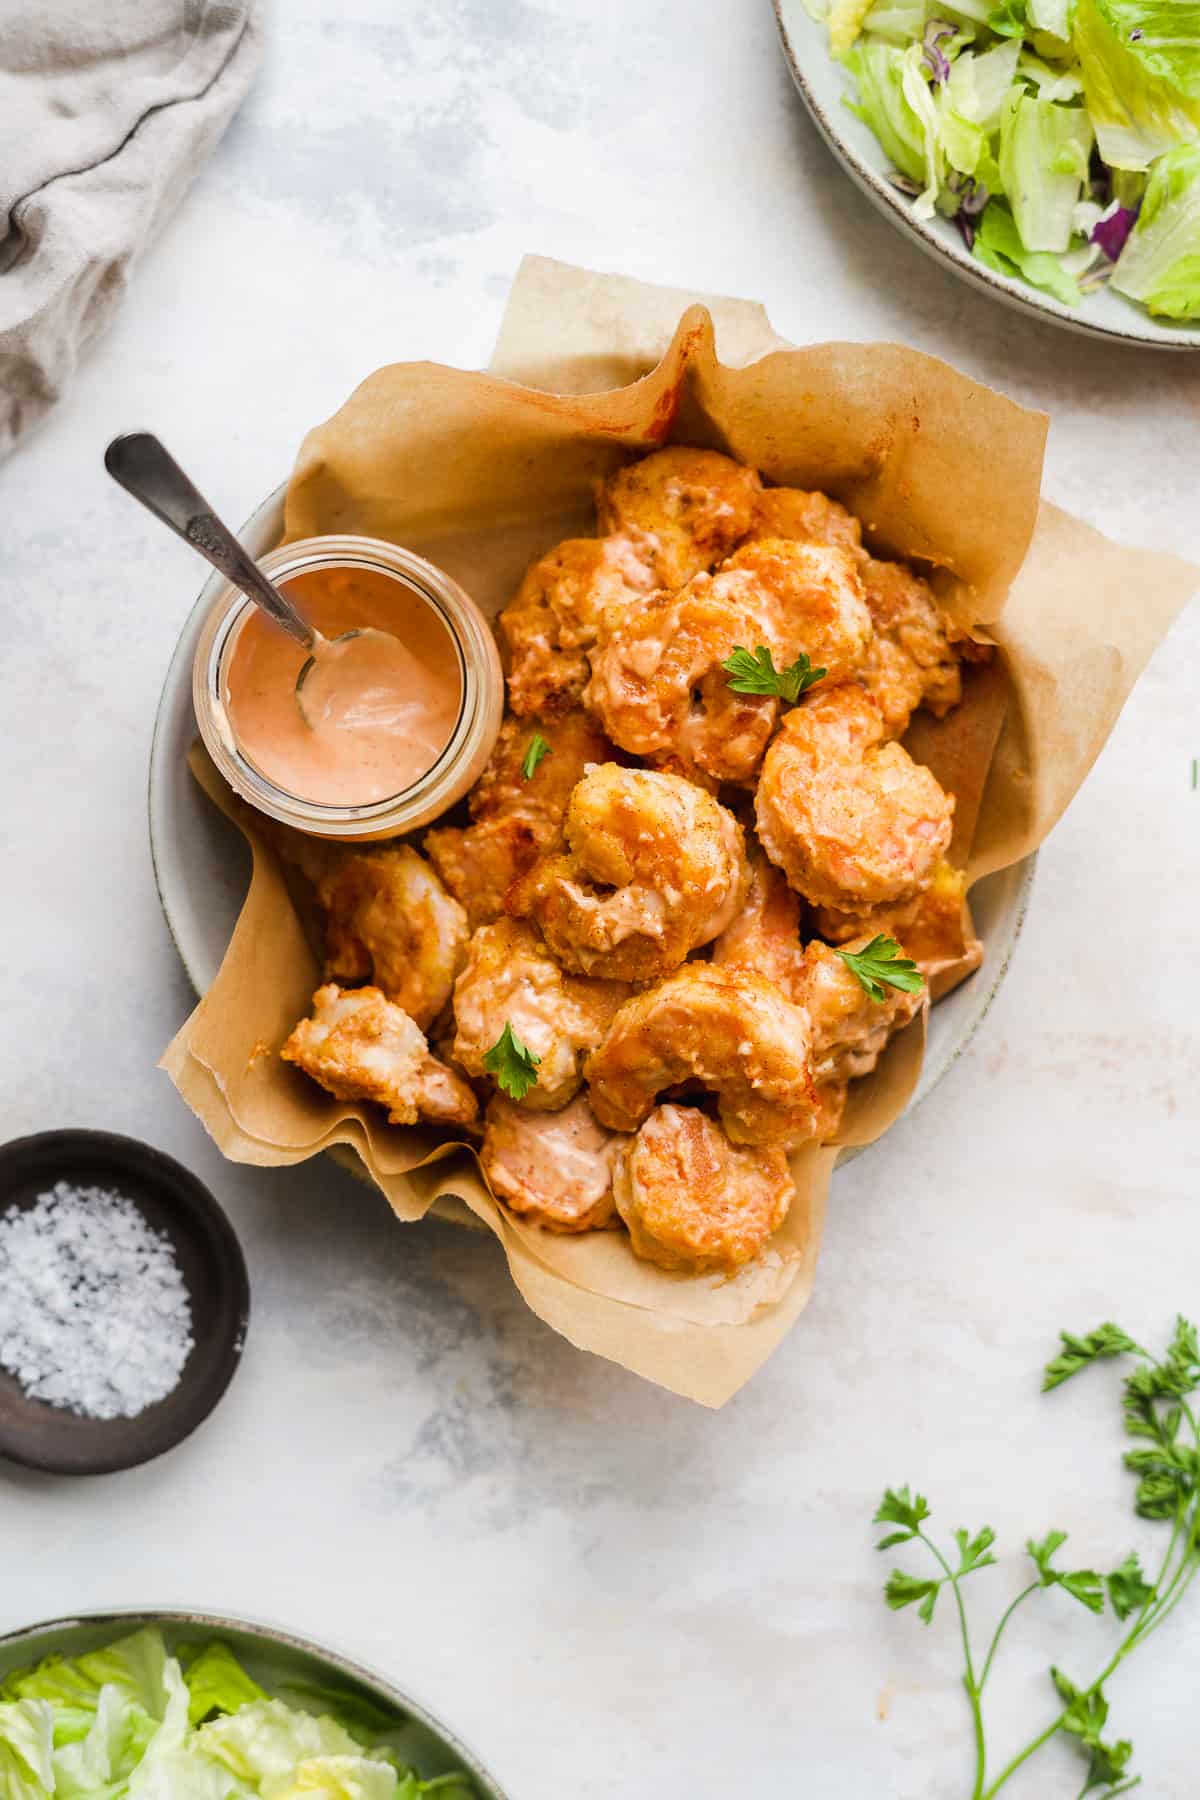 Bang bang shrimp in a basket with parchment paper and sauce on the side.